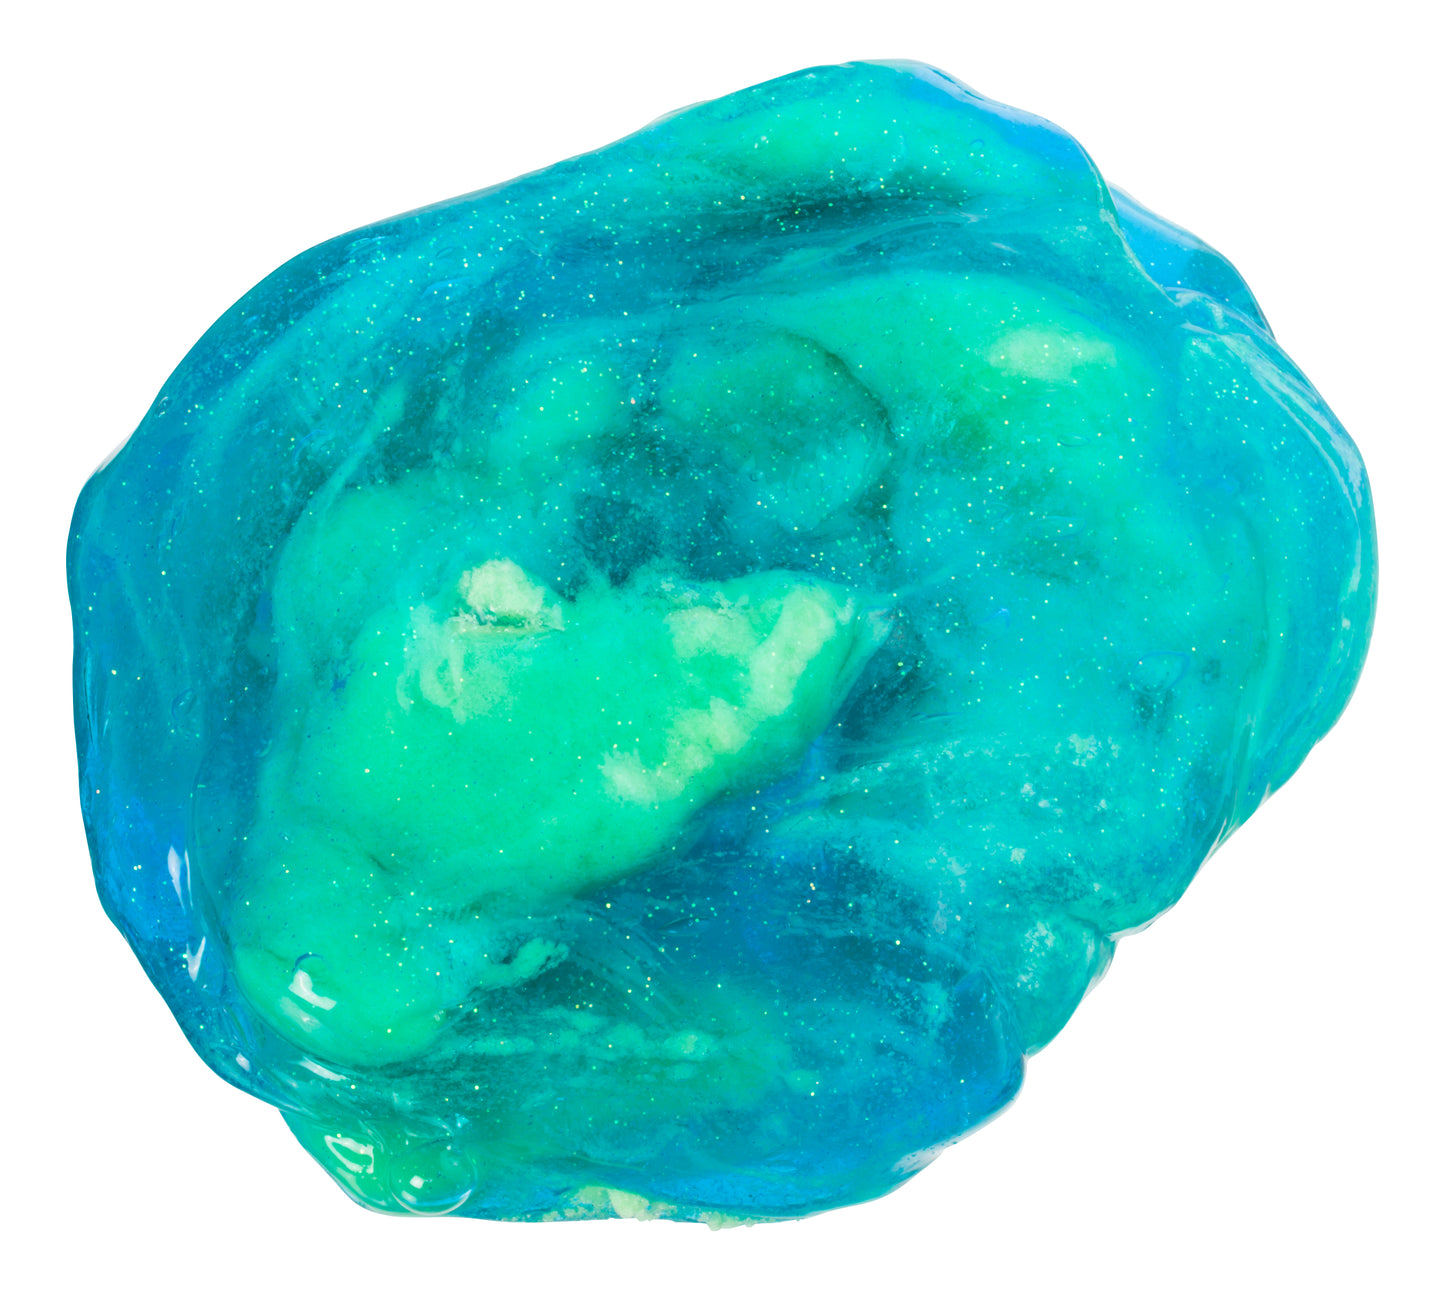 Toysmith Space Scape Slime